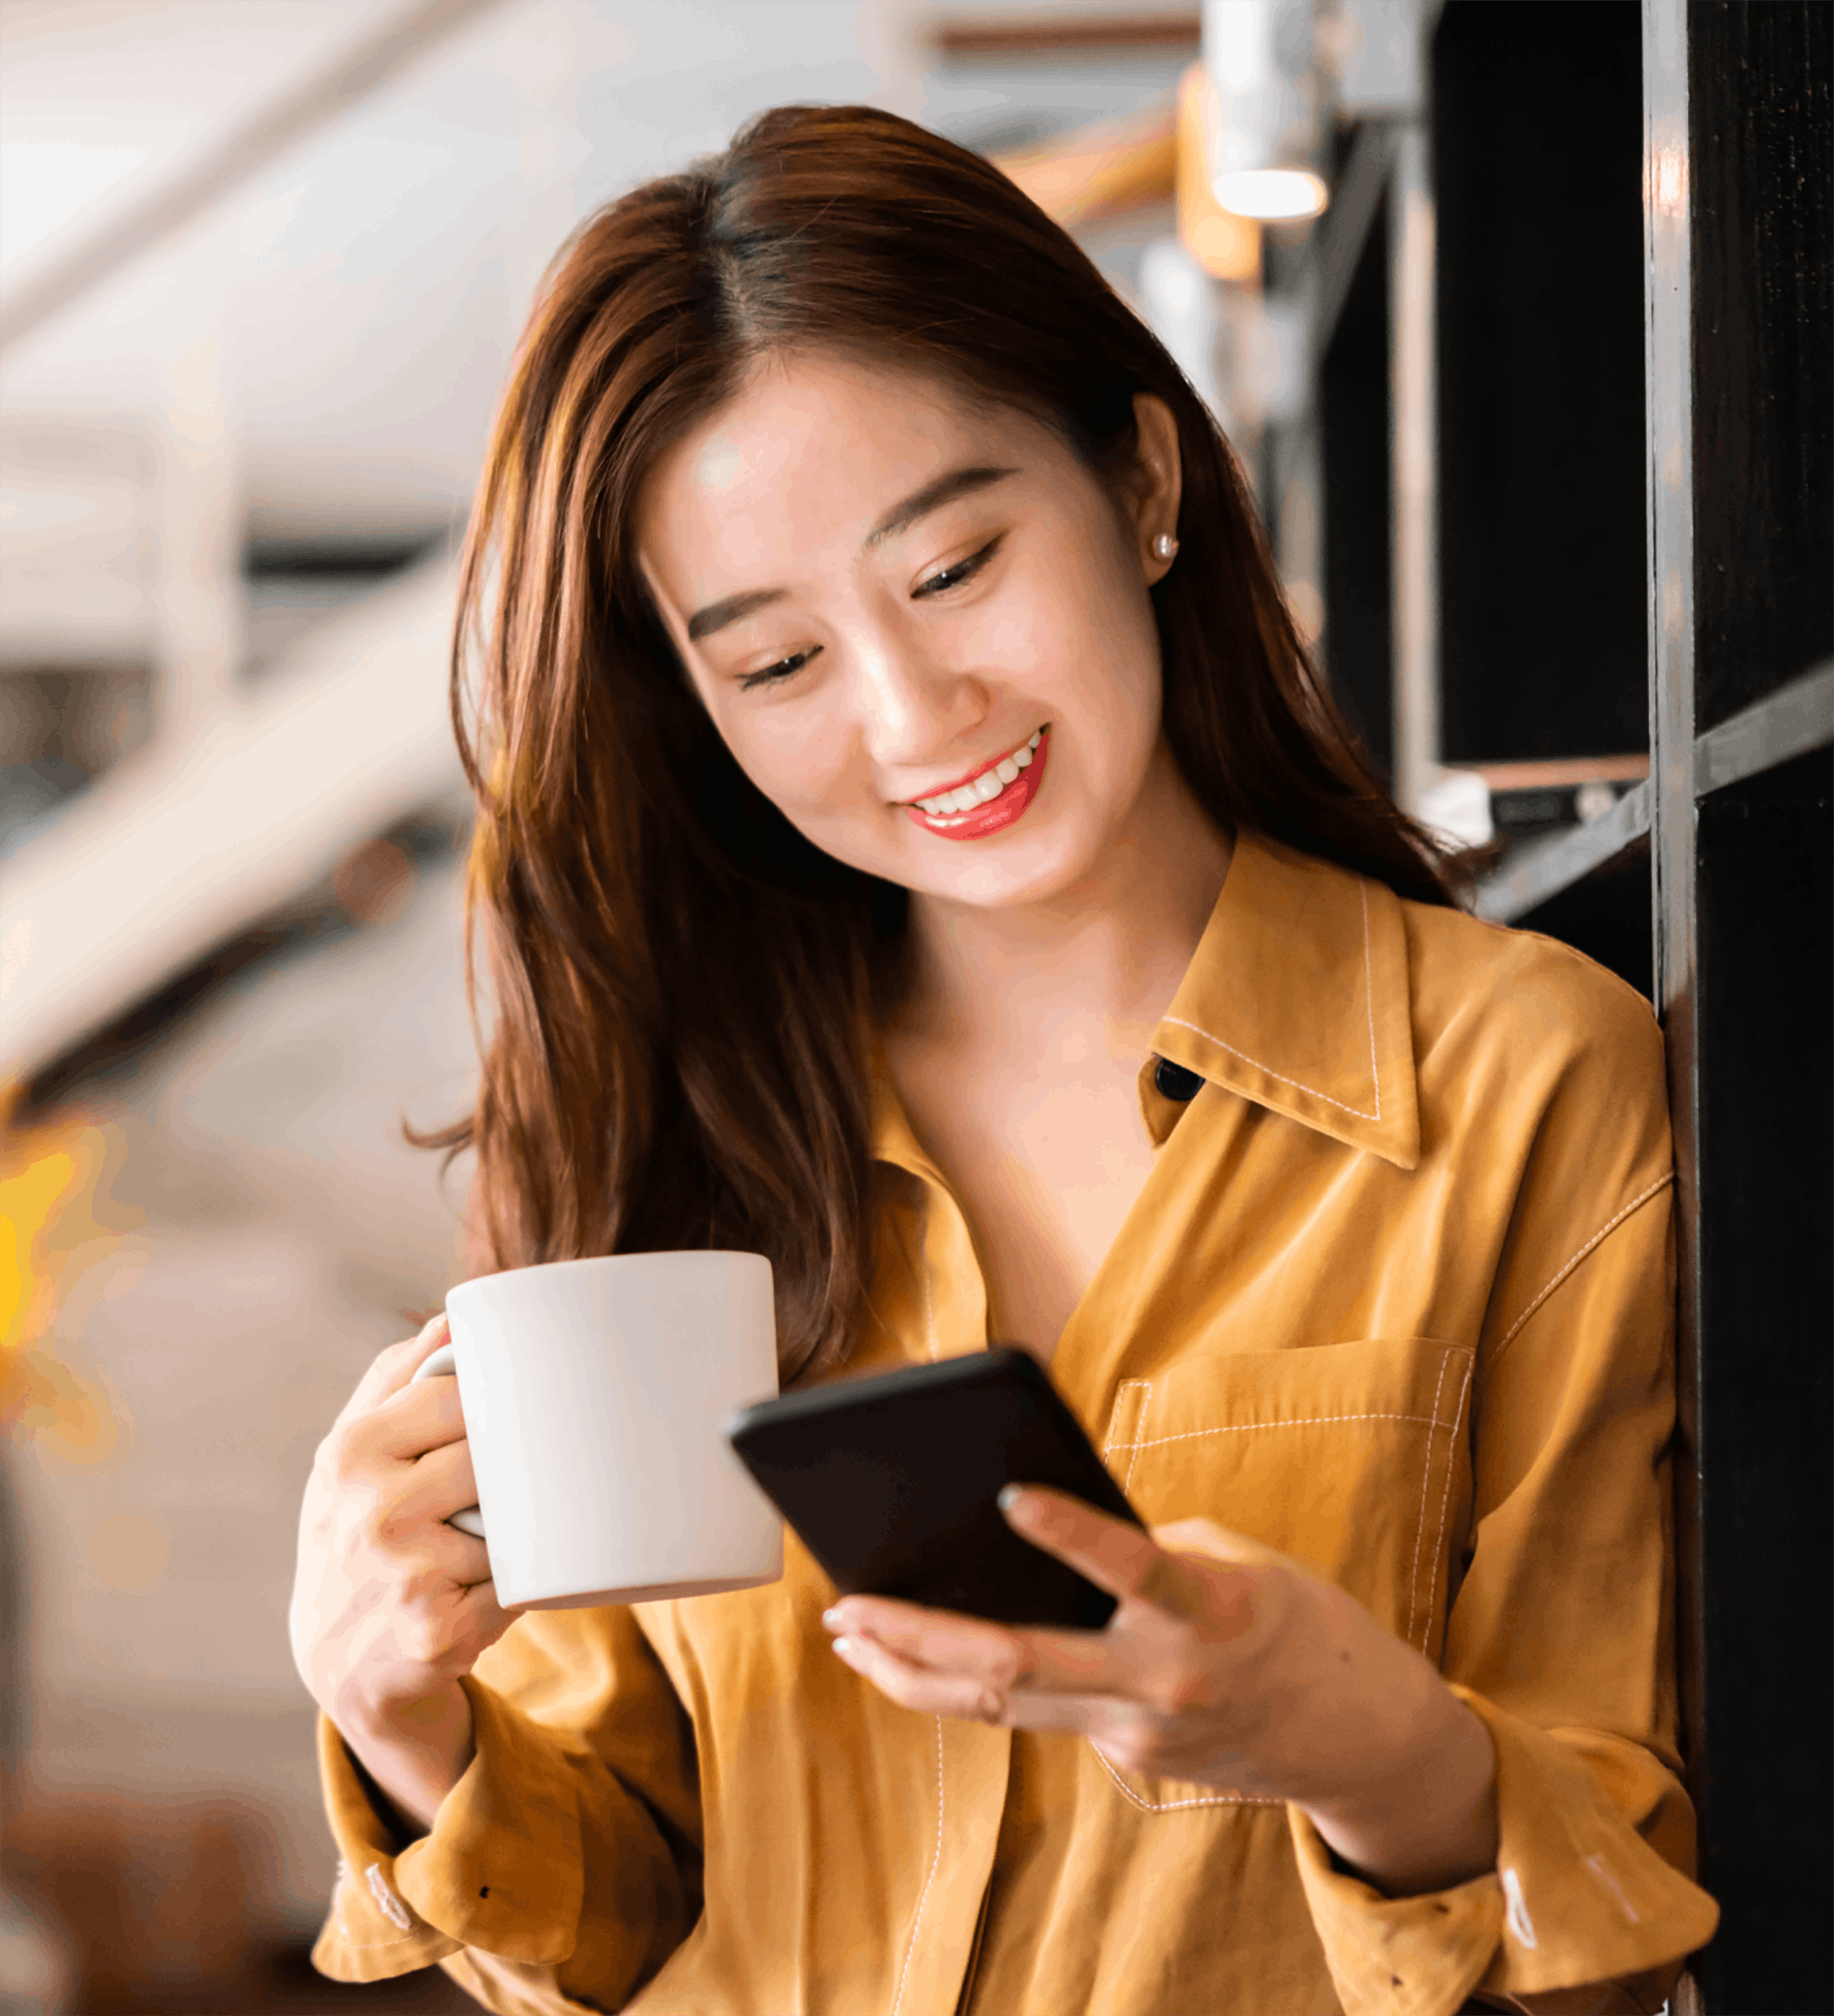 woman holding phone while drinking coffee